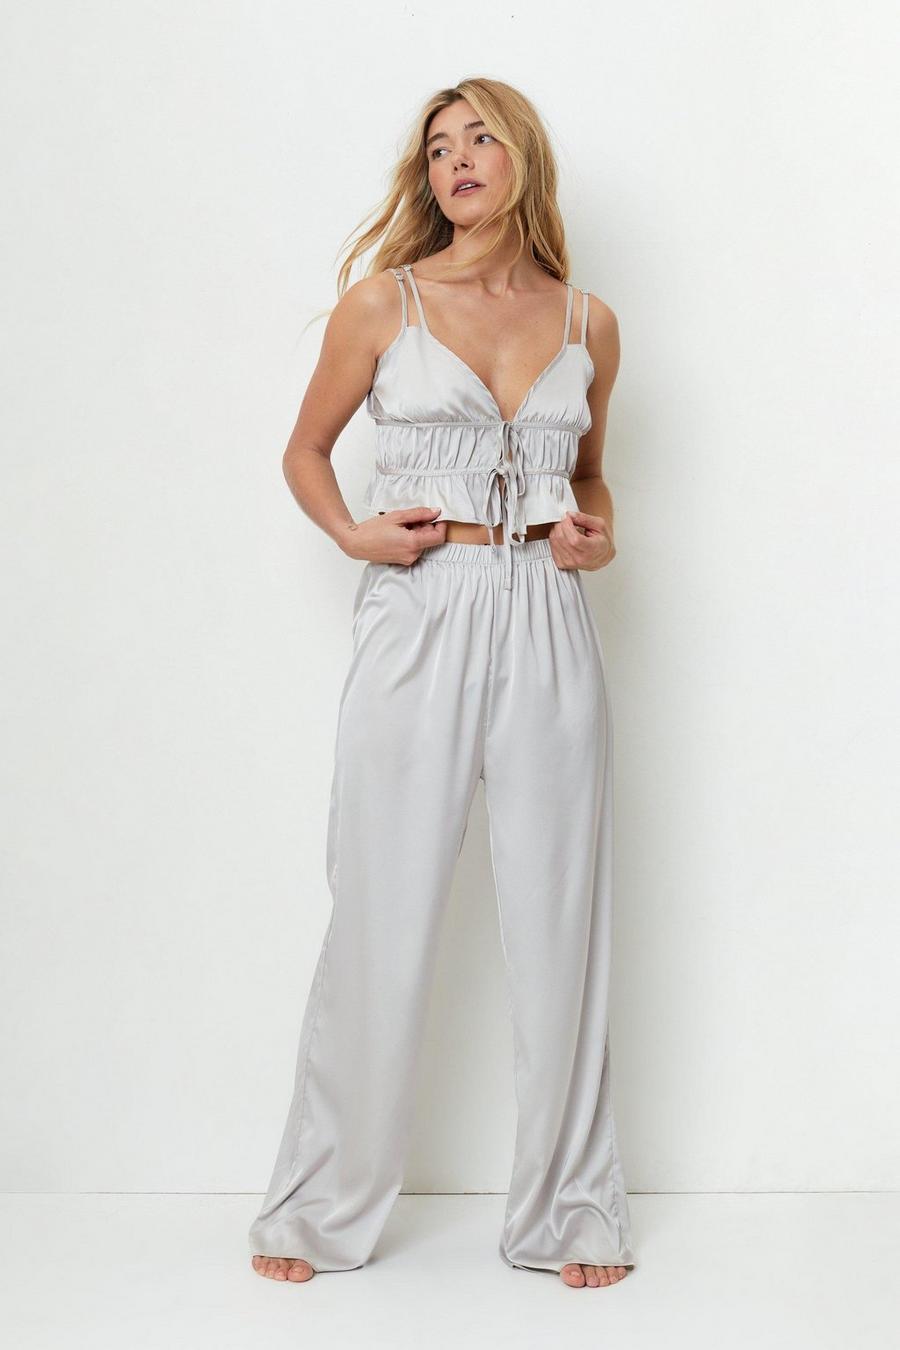 Oyster white Satin Camisole And Wide Leg Pants Pajama Set